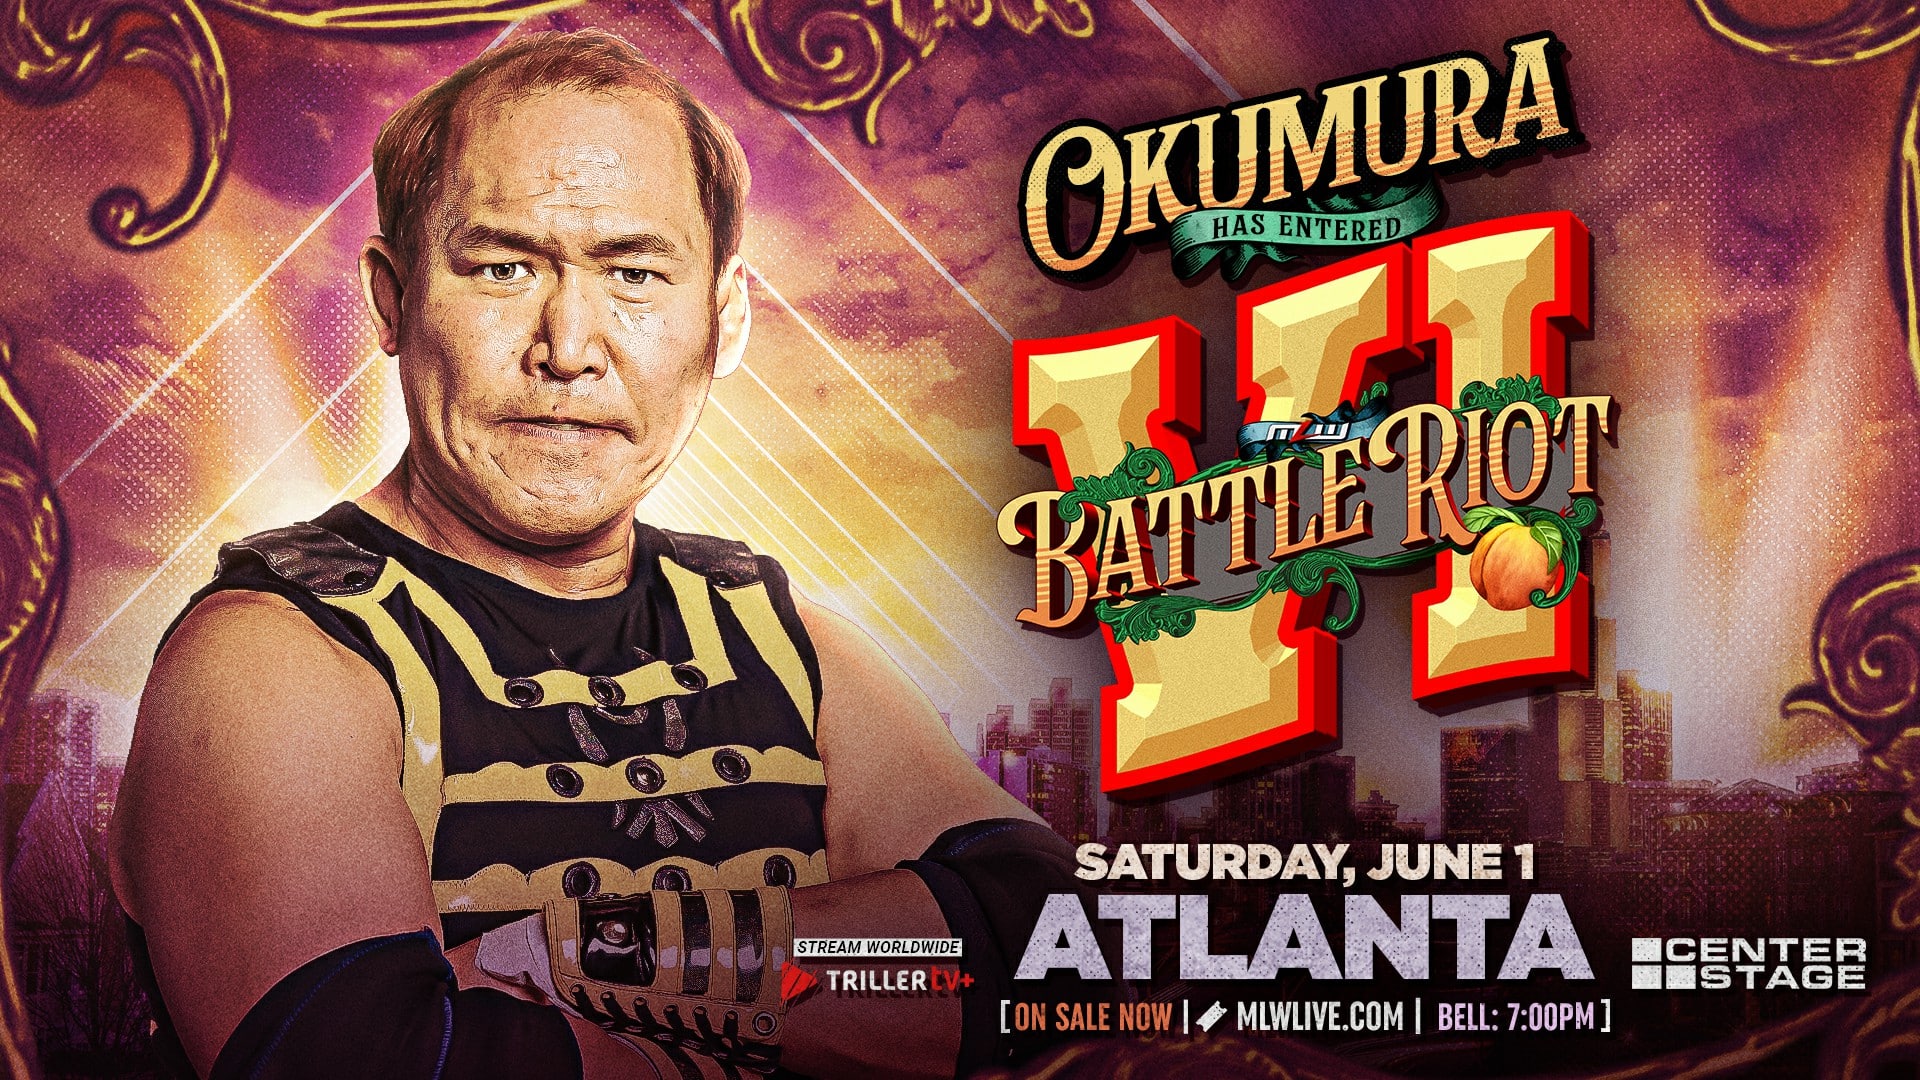 MLW Battle RIOT VI Welcomes Okumura as a Participant